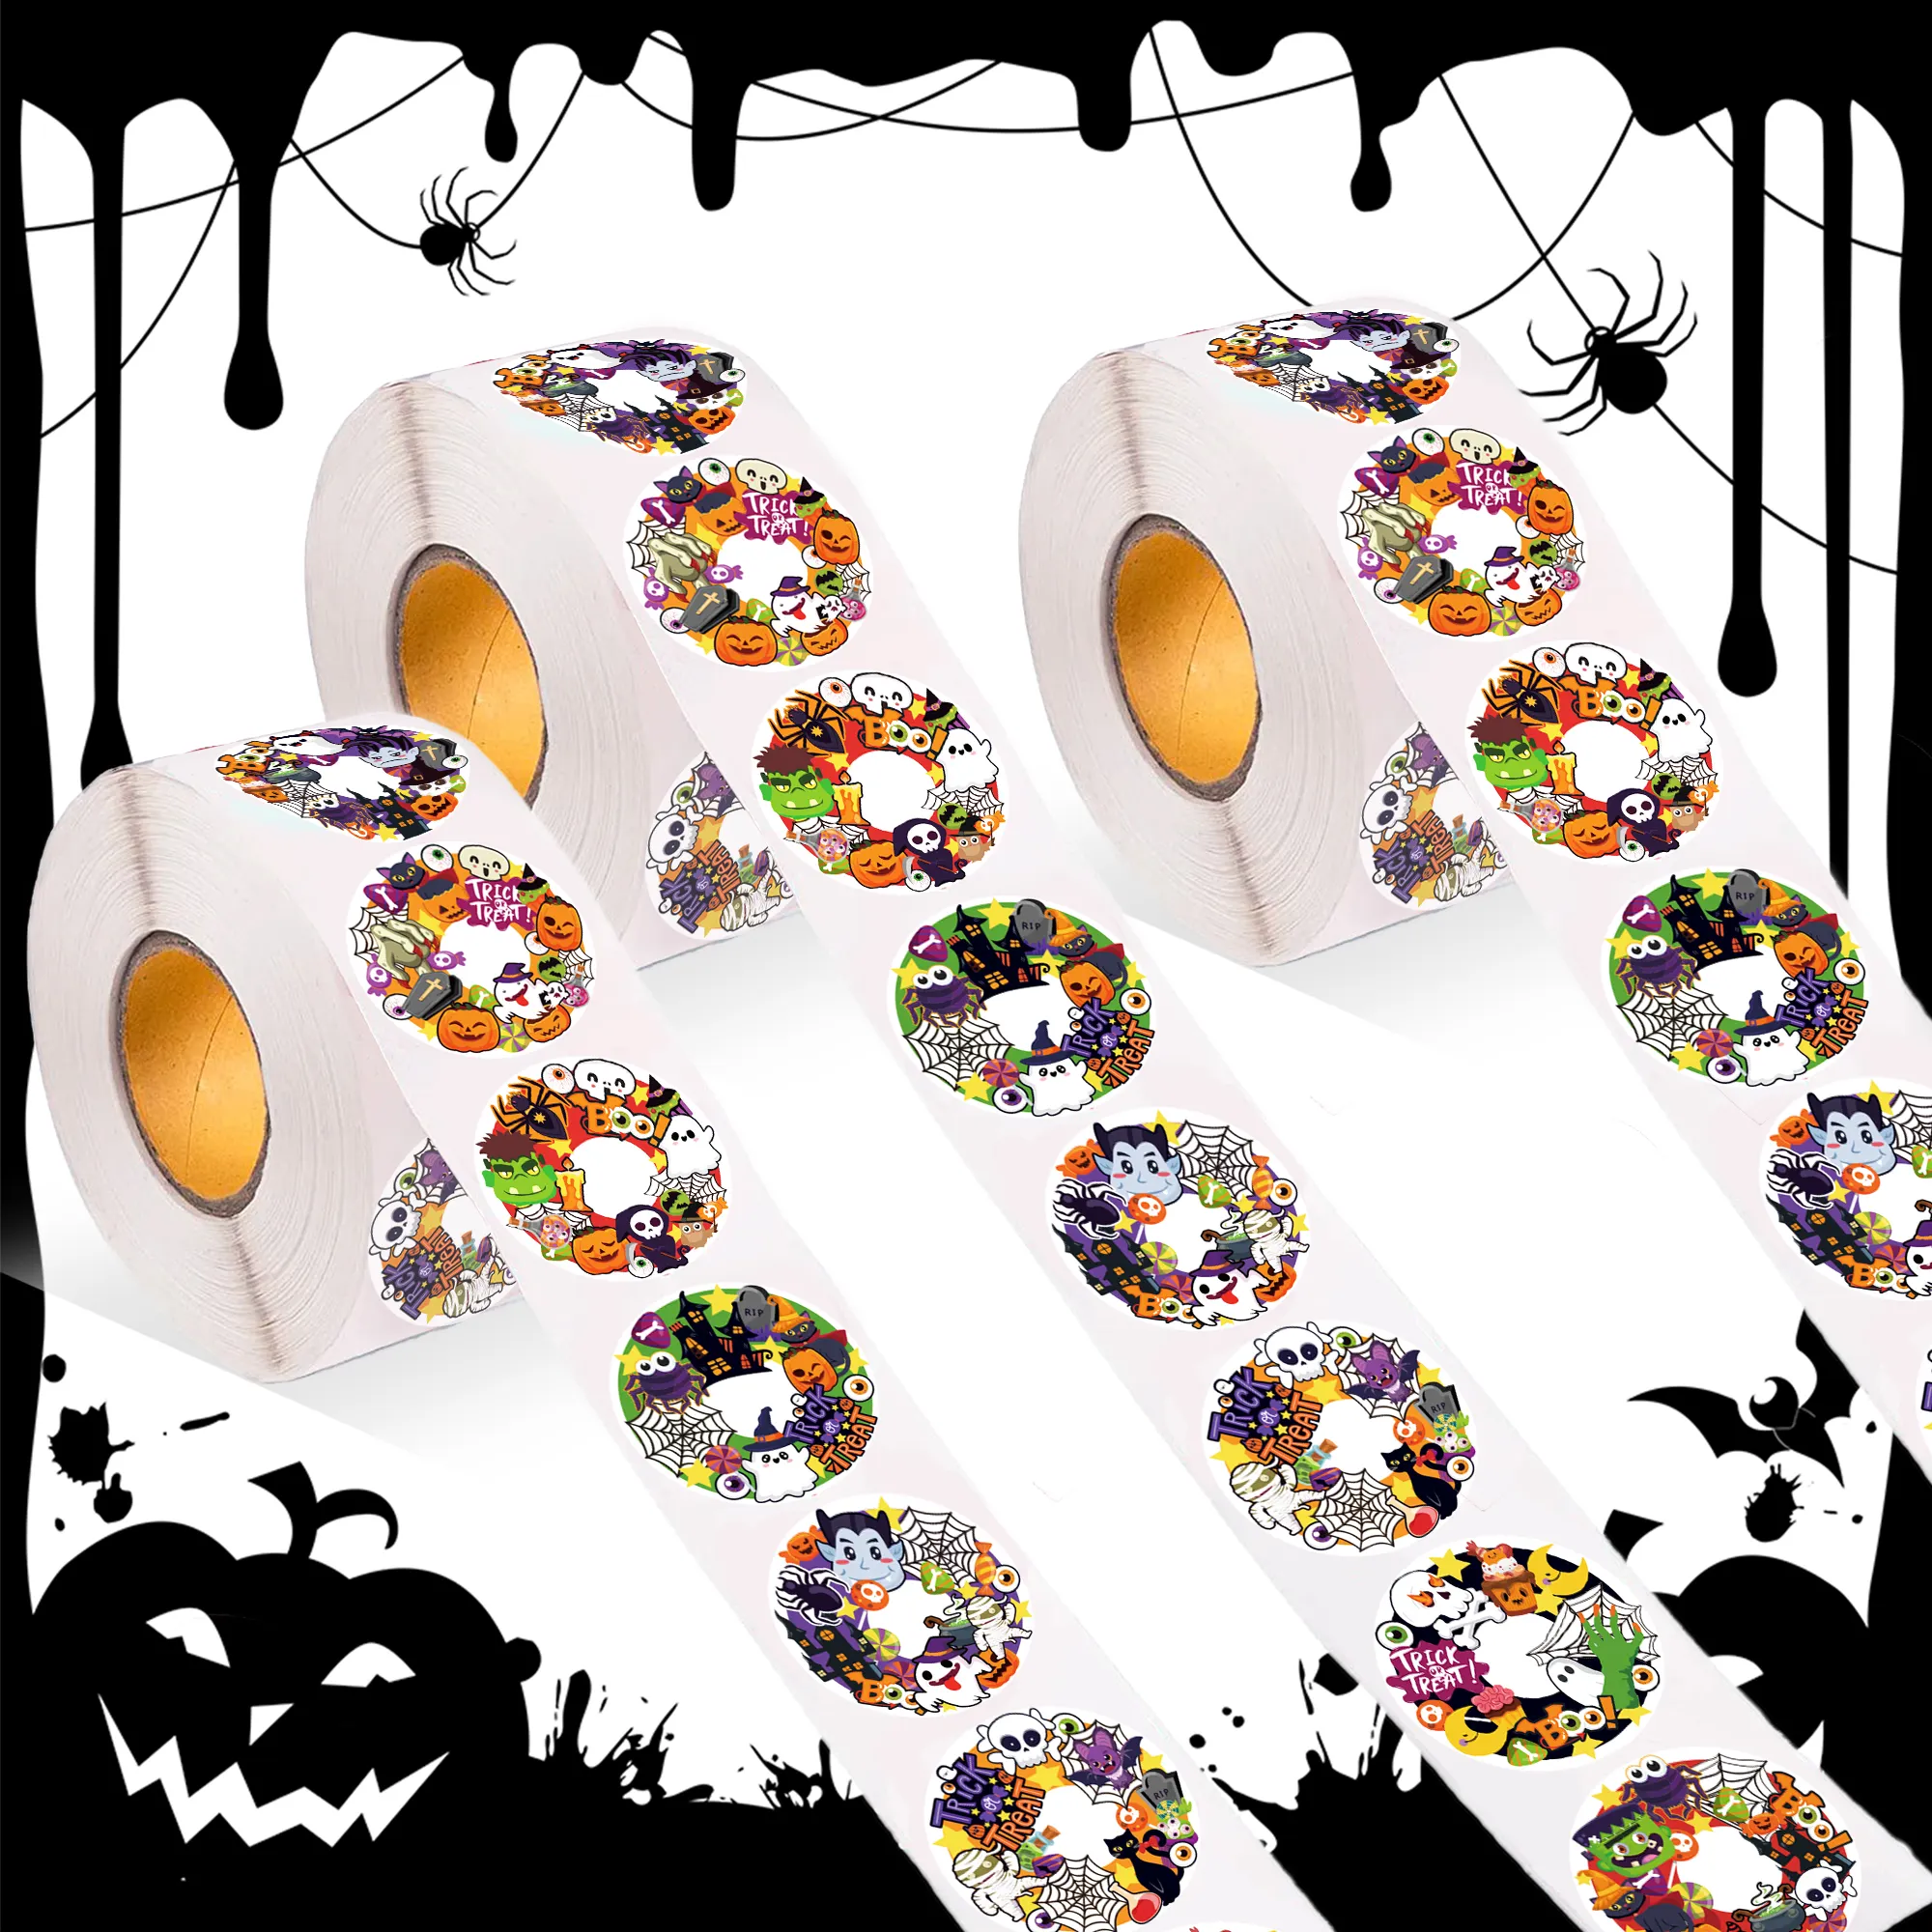 JT025 Halloween Label Adhesive Stickers Roll Round Seal Ghost Pumpkin Stickers for Halloween Party Blackboard